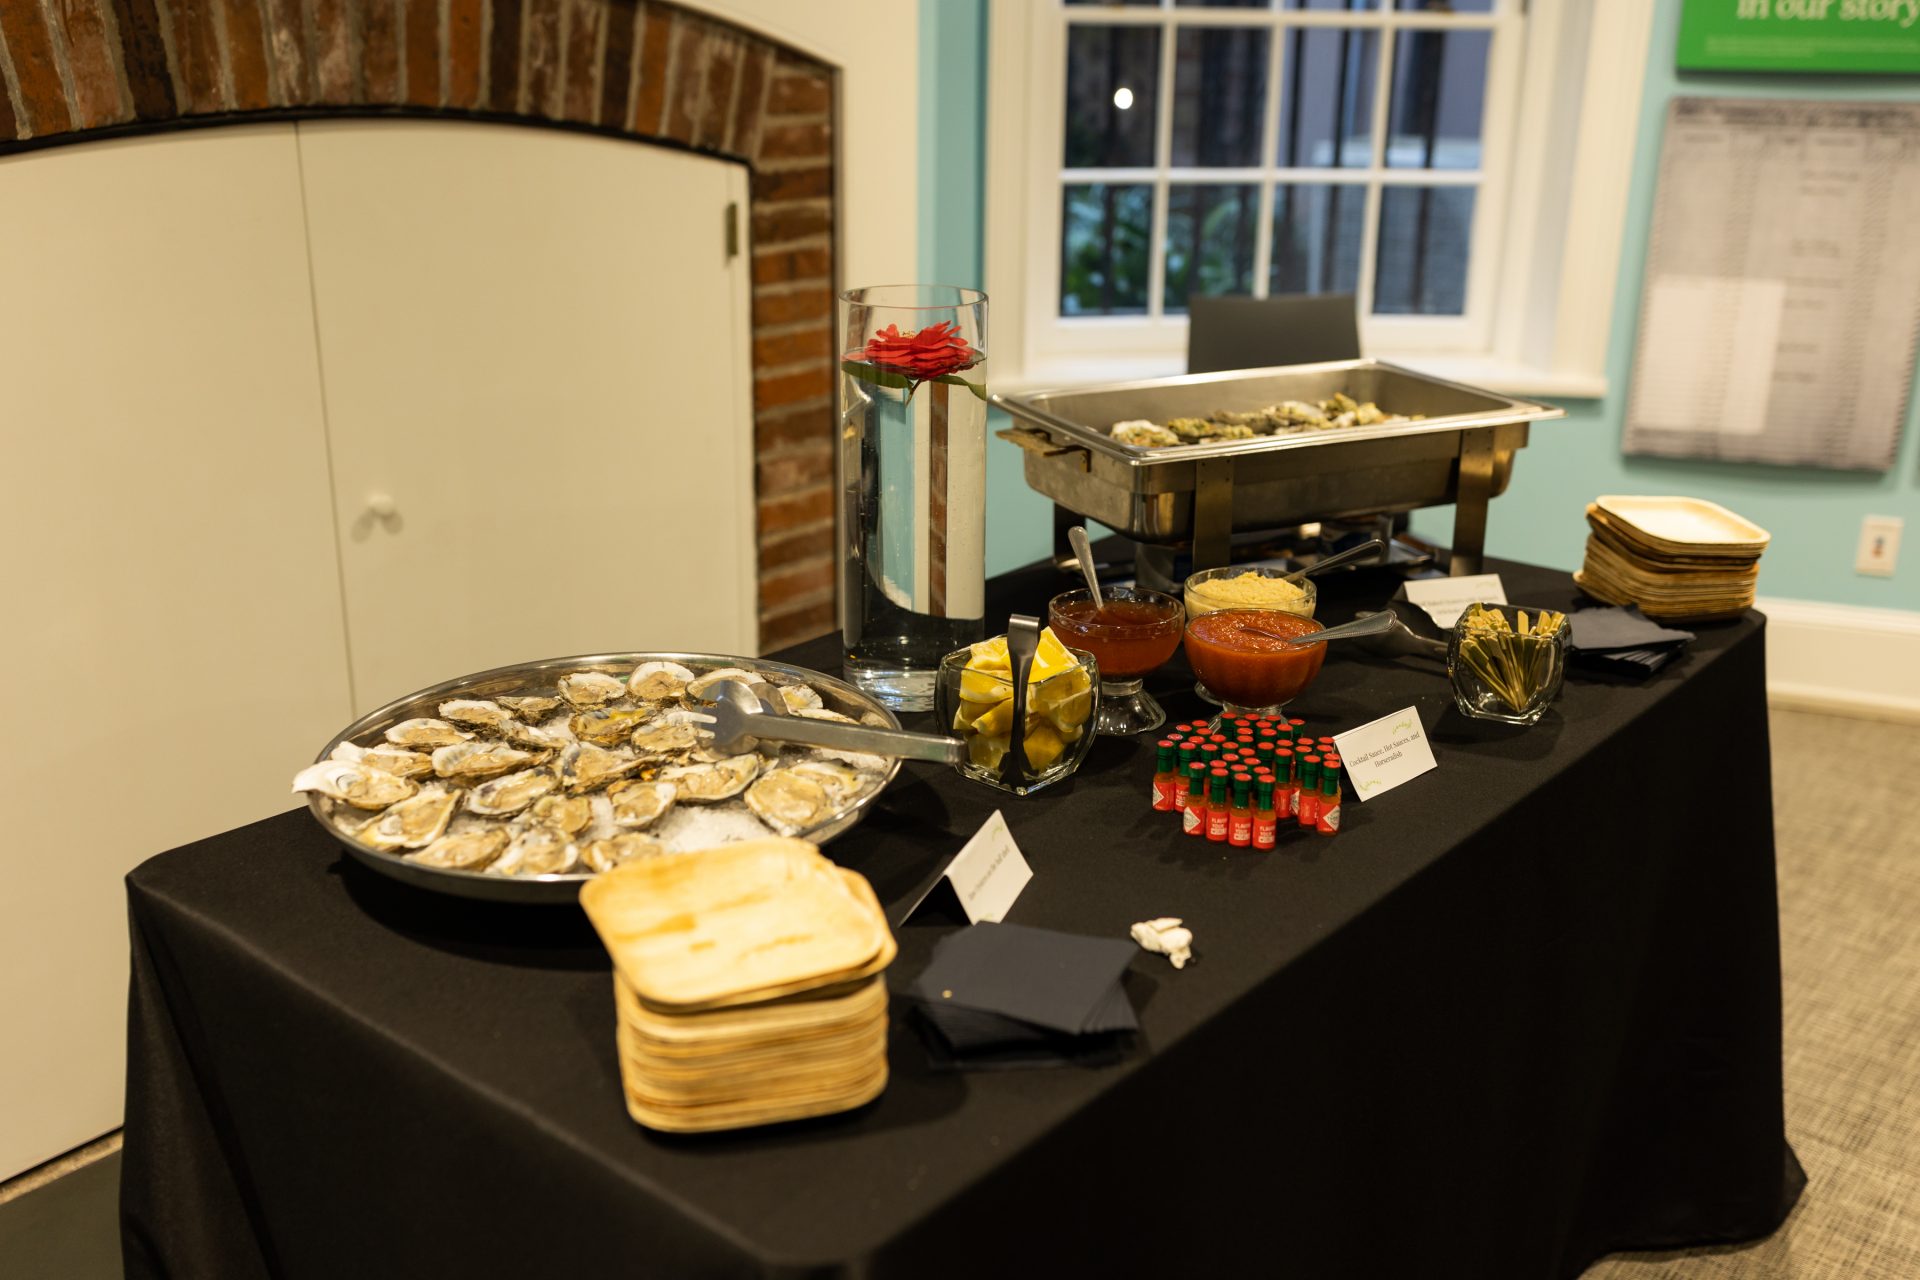 Oysters, condiments, lemon slices, and plates for guests to enjoy in the Orientation gallery.